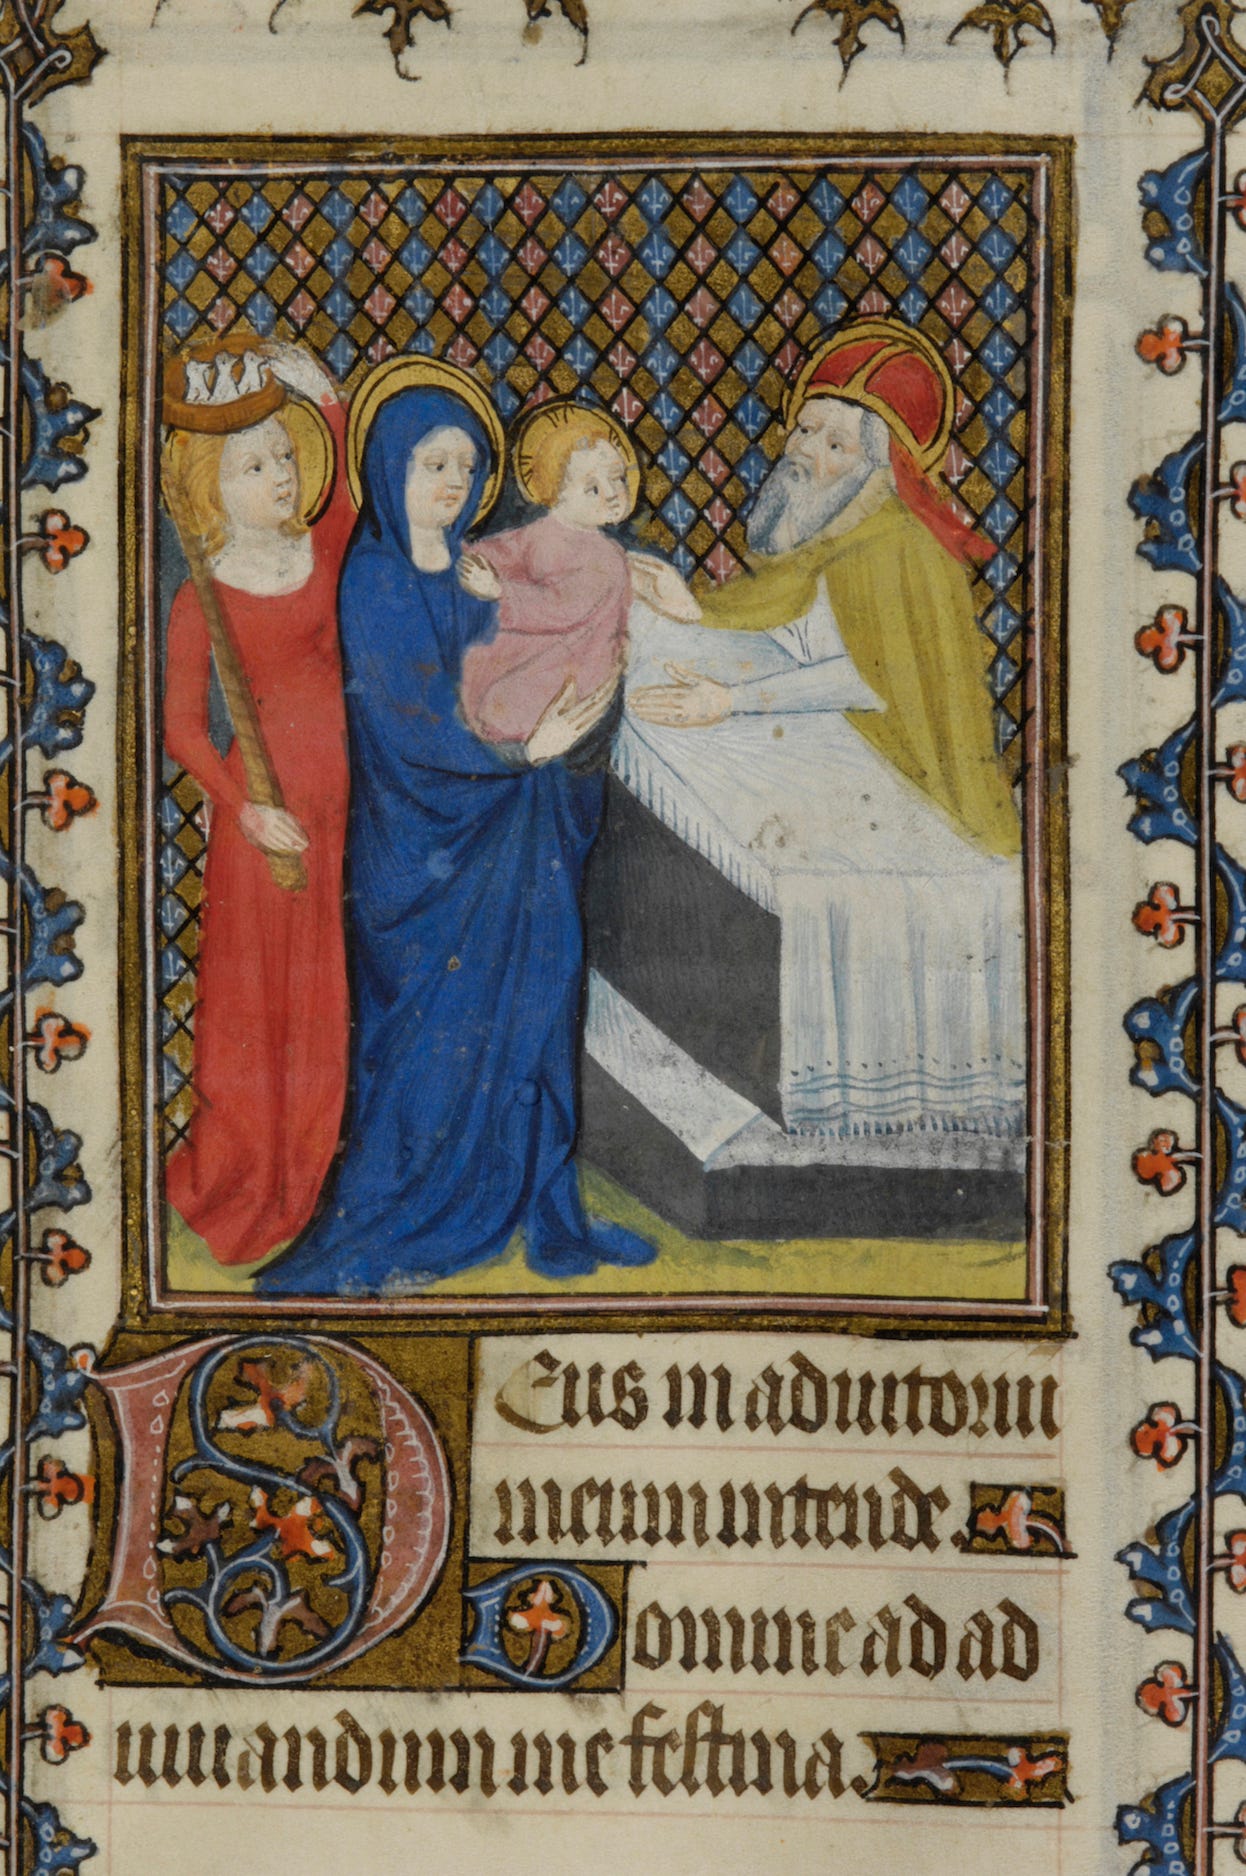 Figure 5. Prophetess Anna balancing basket of three doves on her head and holding candle at the Presentation of Christ. Book of Hours (ca. 1400). New York, Morgan Library S.9, fol. 79r.